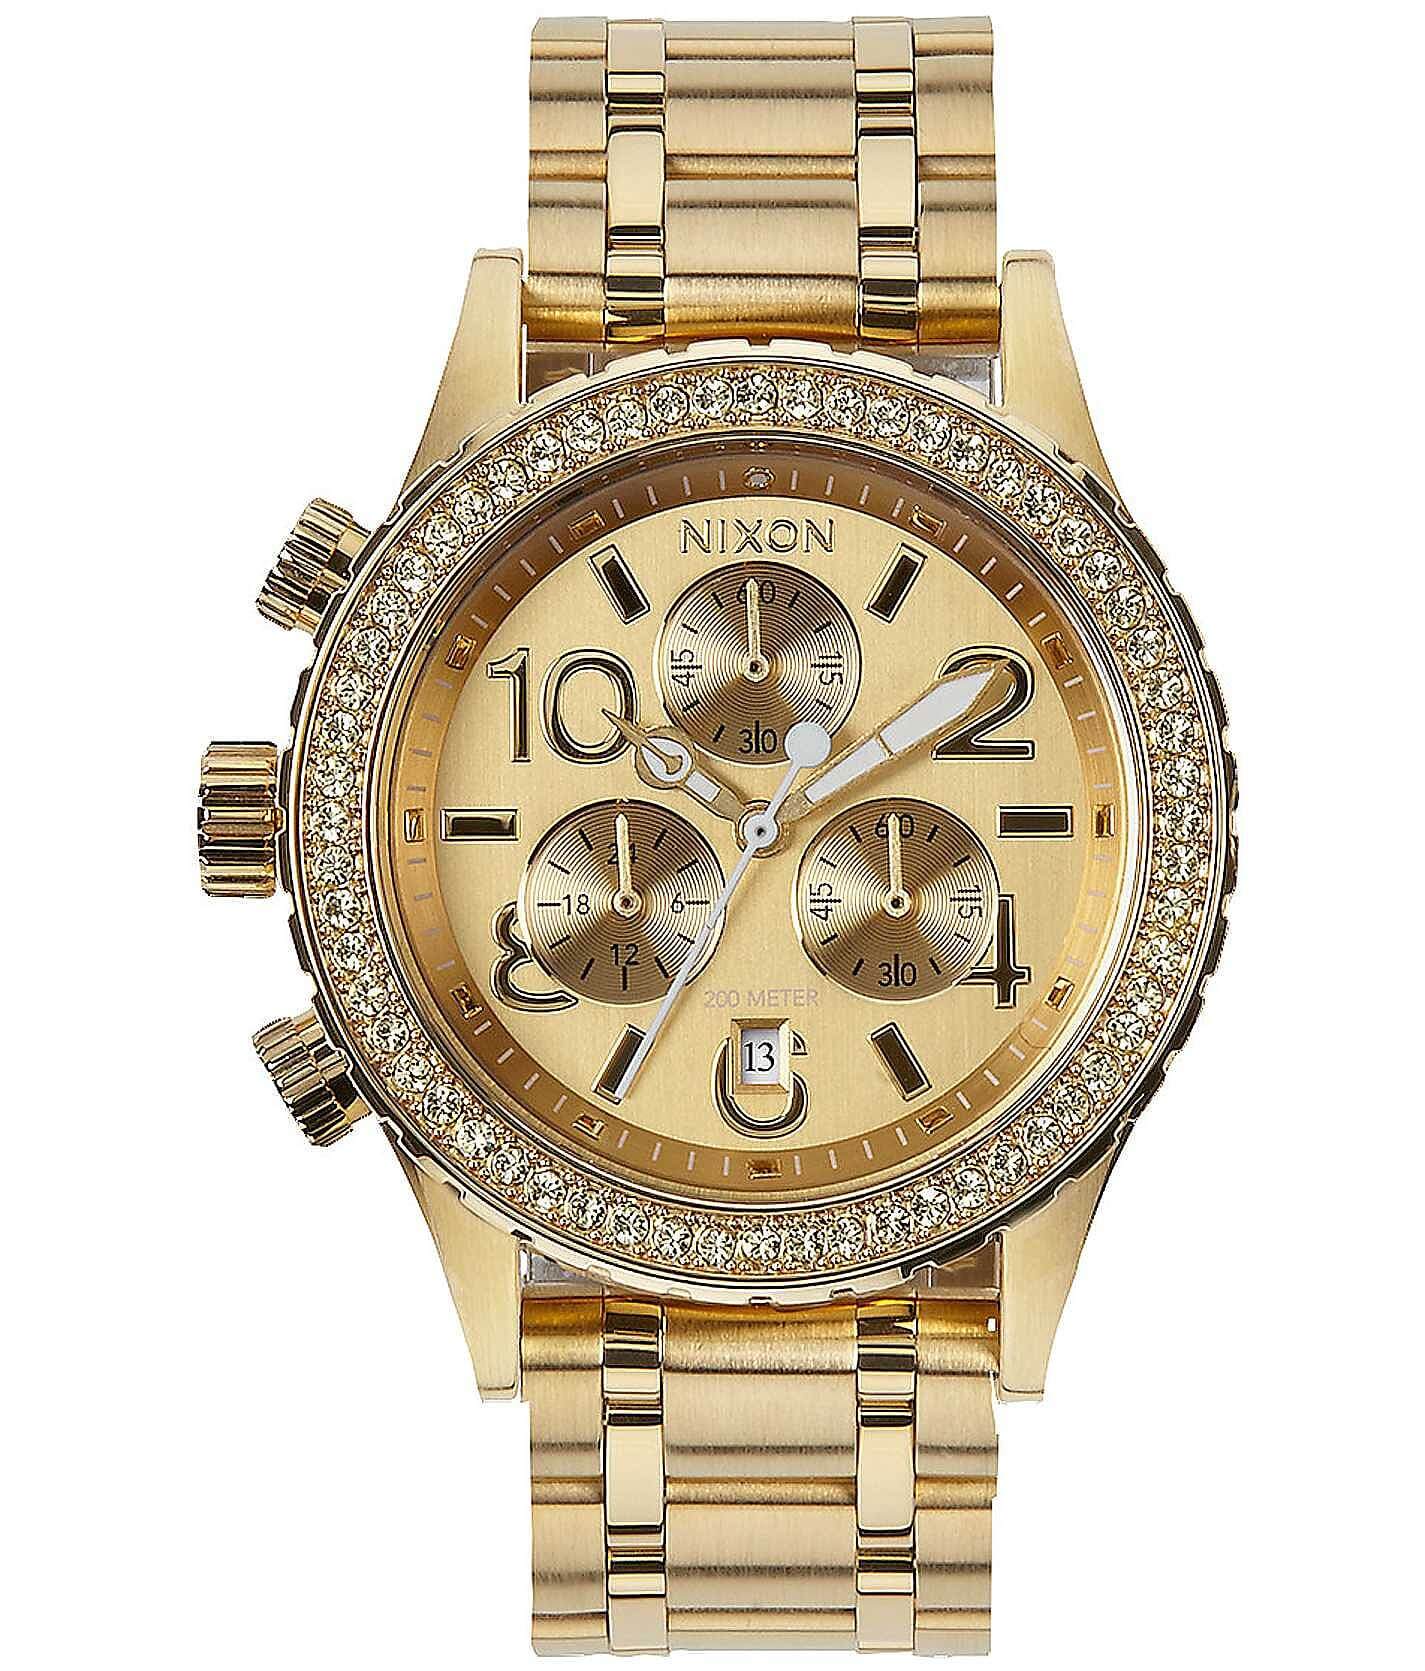 Nixon 38-20 Chrono Watch - Women's Watches in All Gold Crystal 